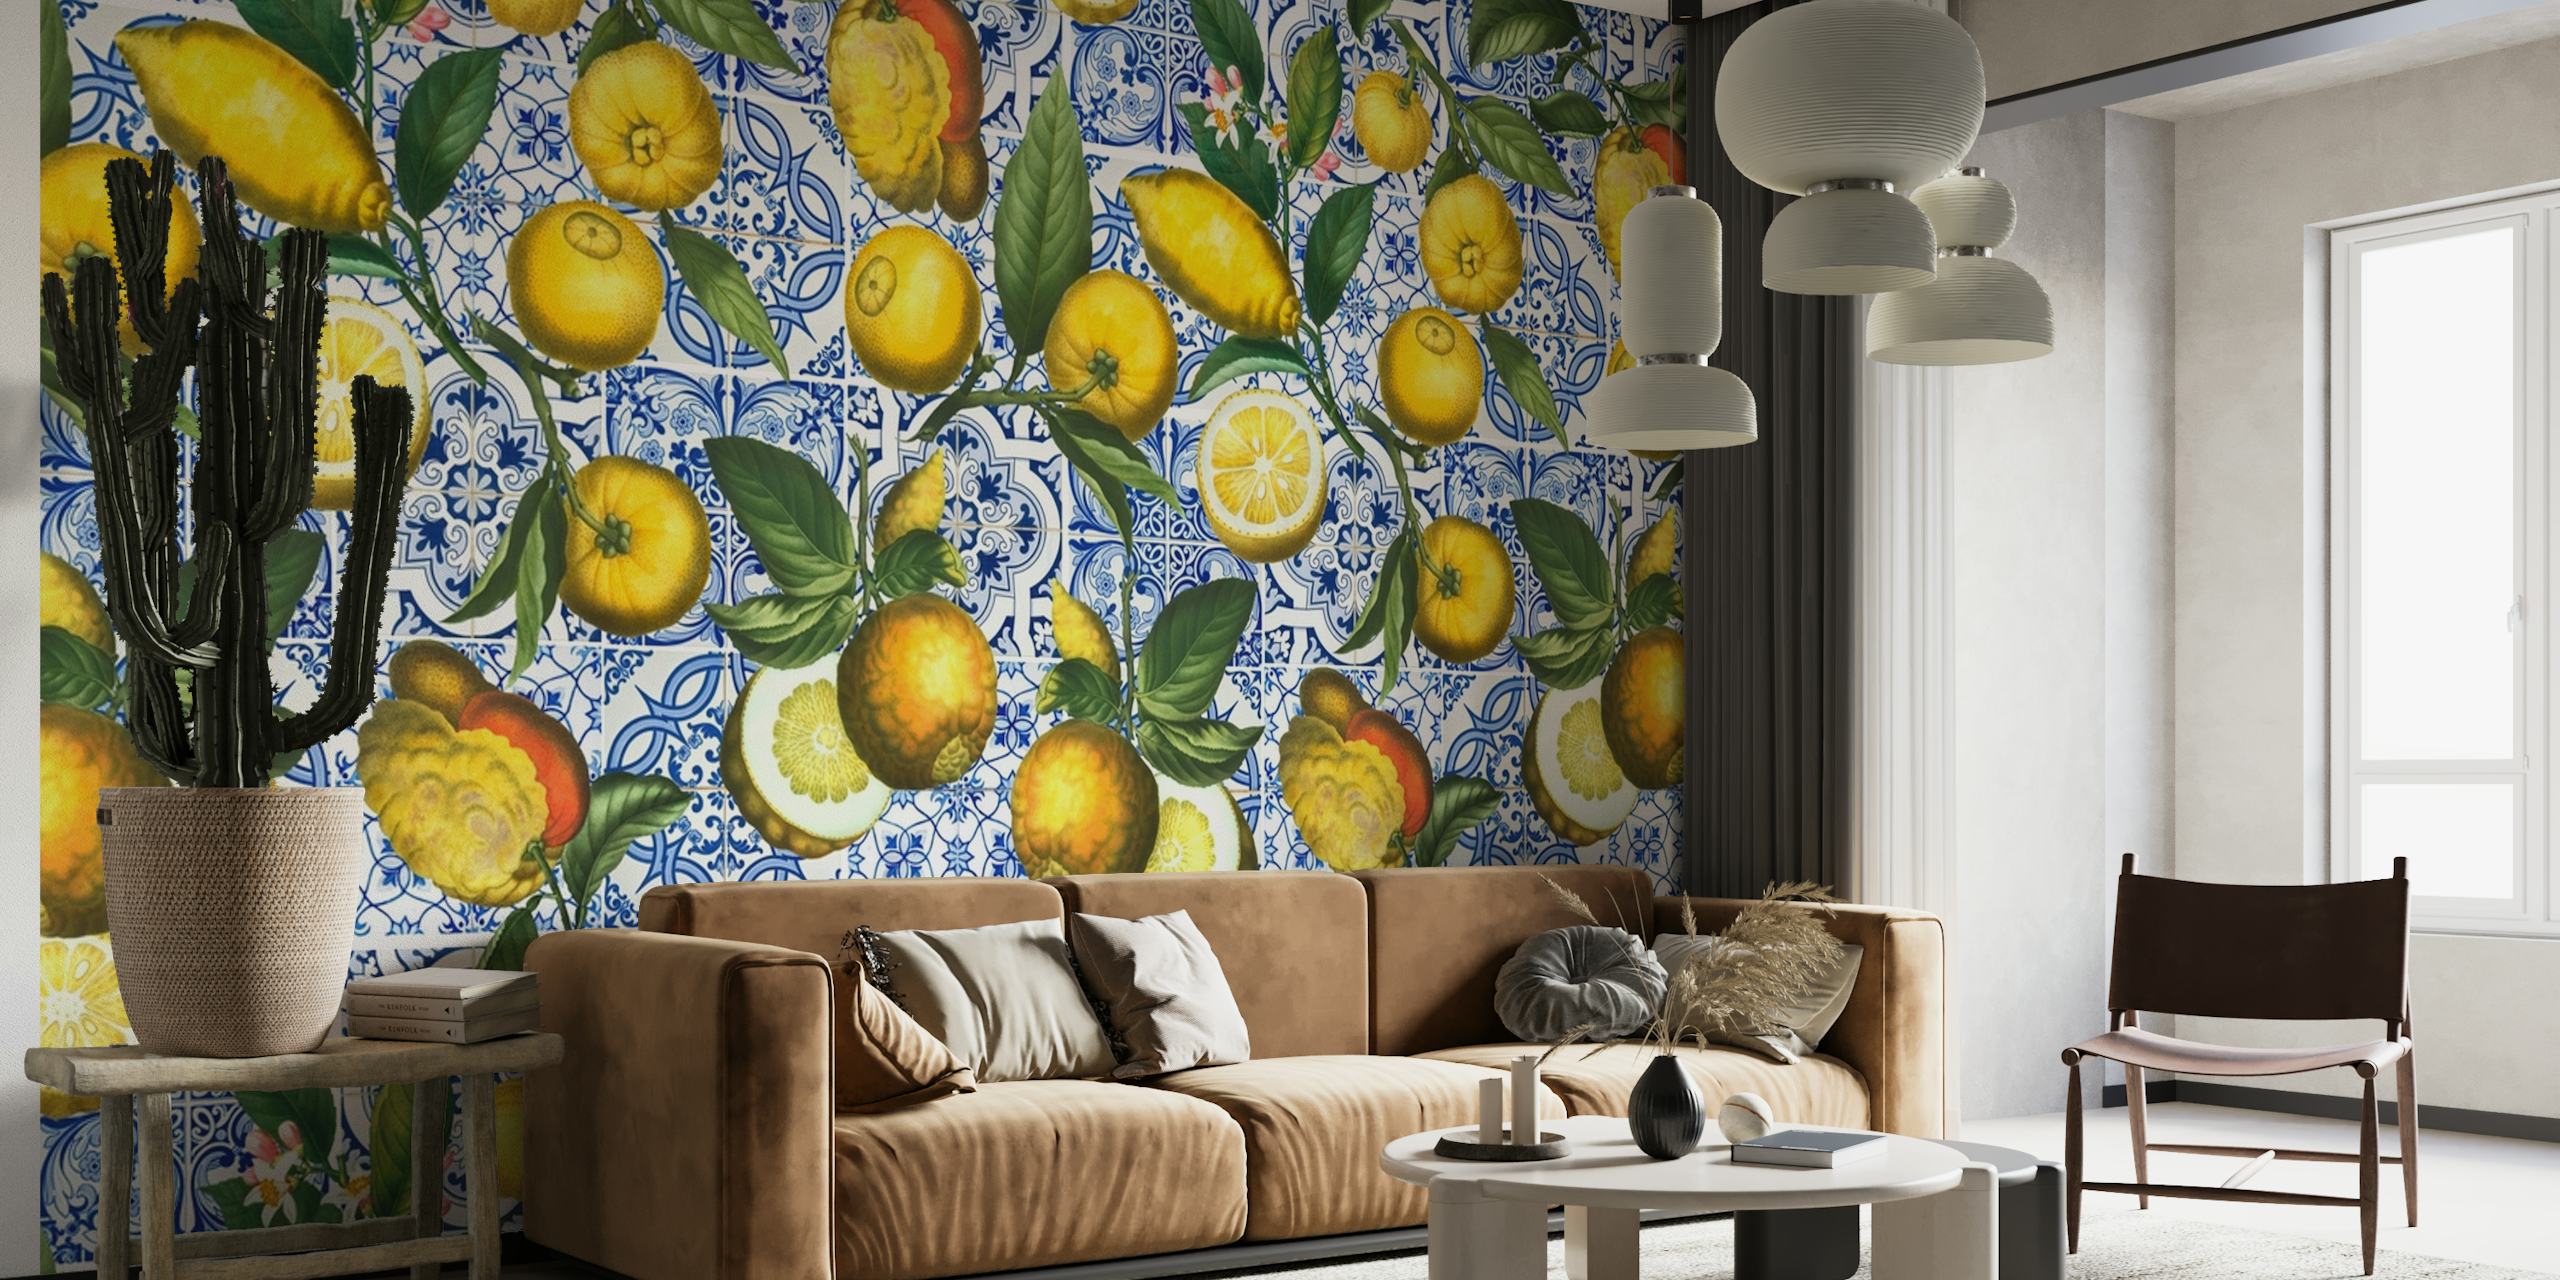 Mediterranean style lemon and tile patterned wall mural